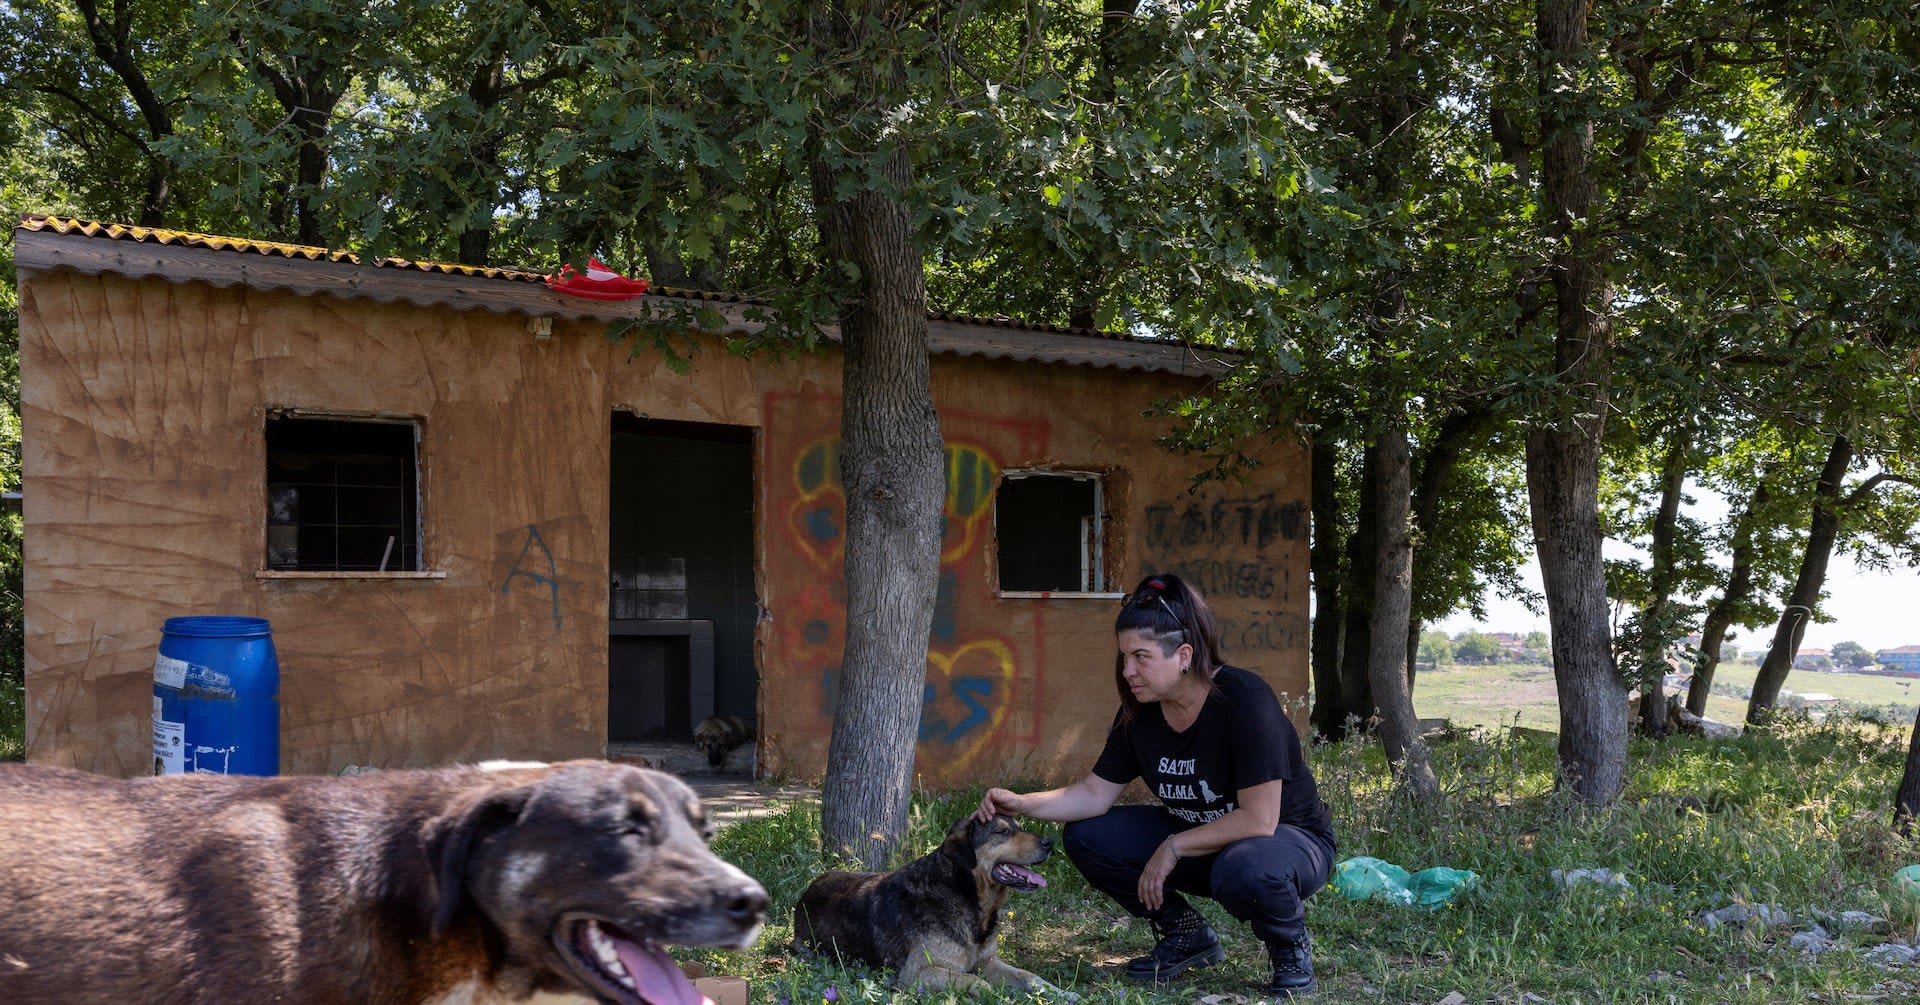 Turkey's plan to get stray dogs off streets touches raw nerve